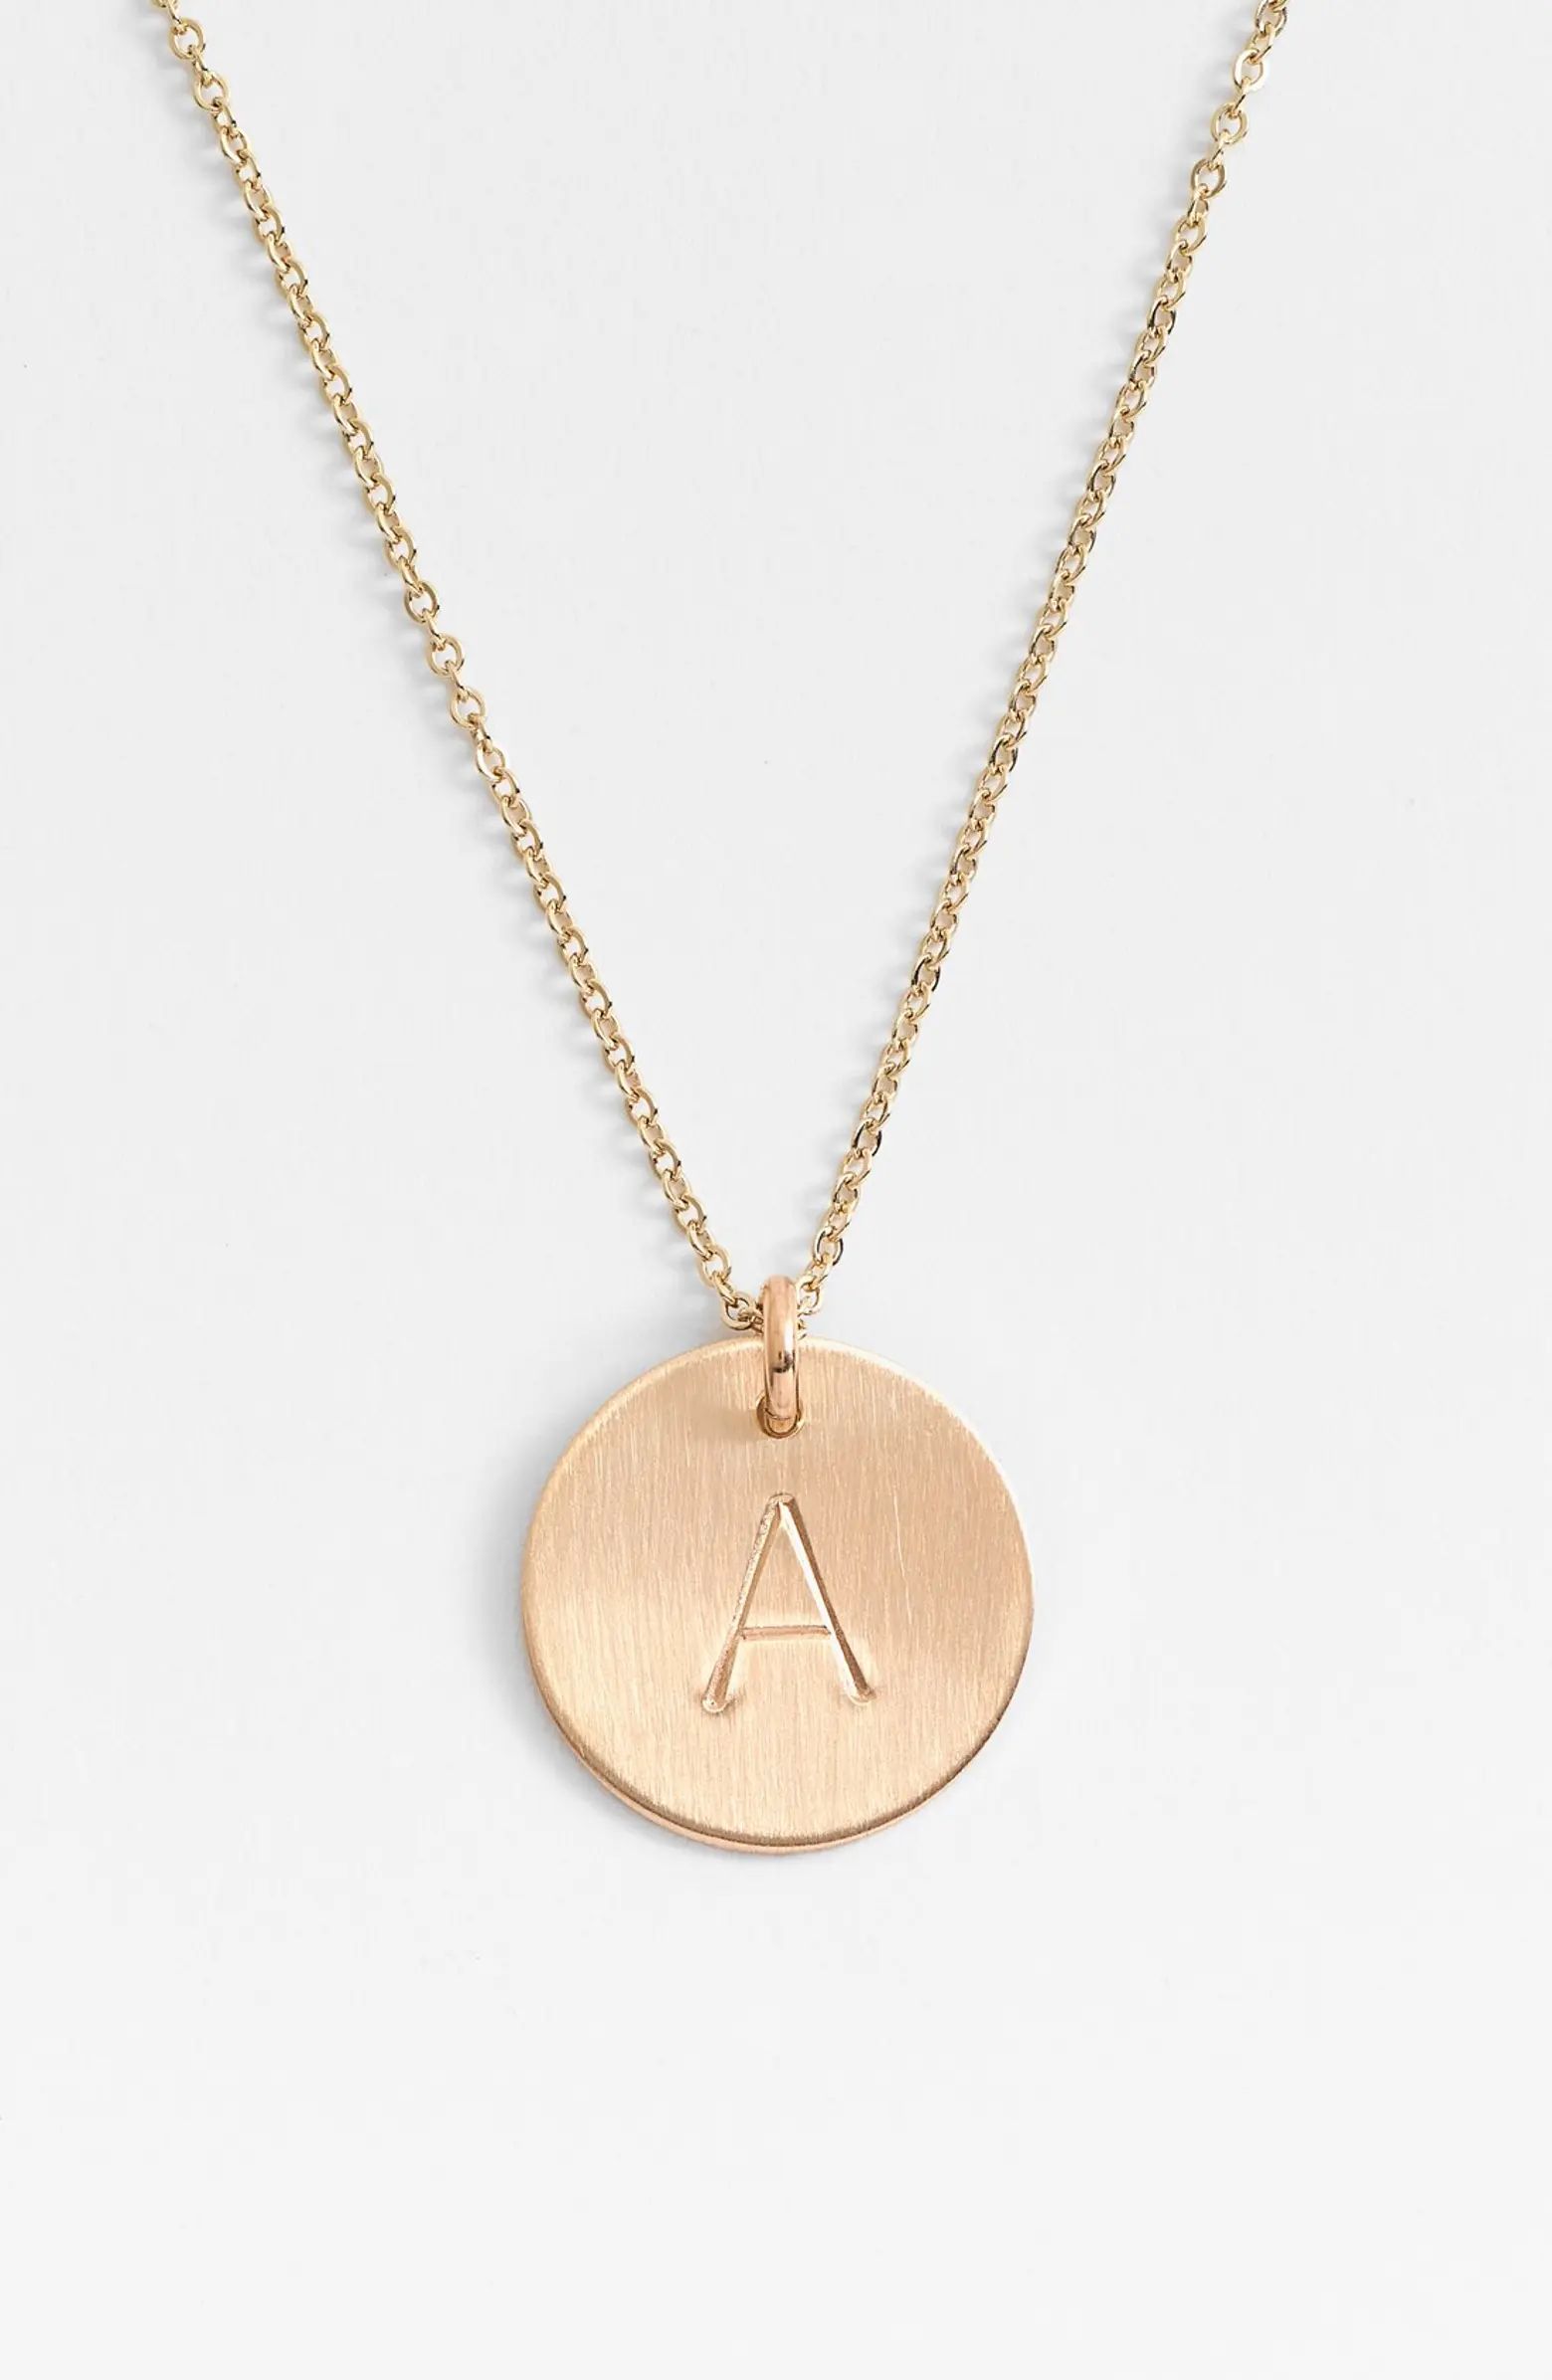 14k-Gold Fill Initial Disc Necklace | Nordstrom